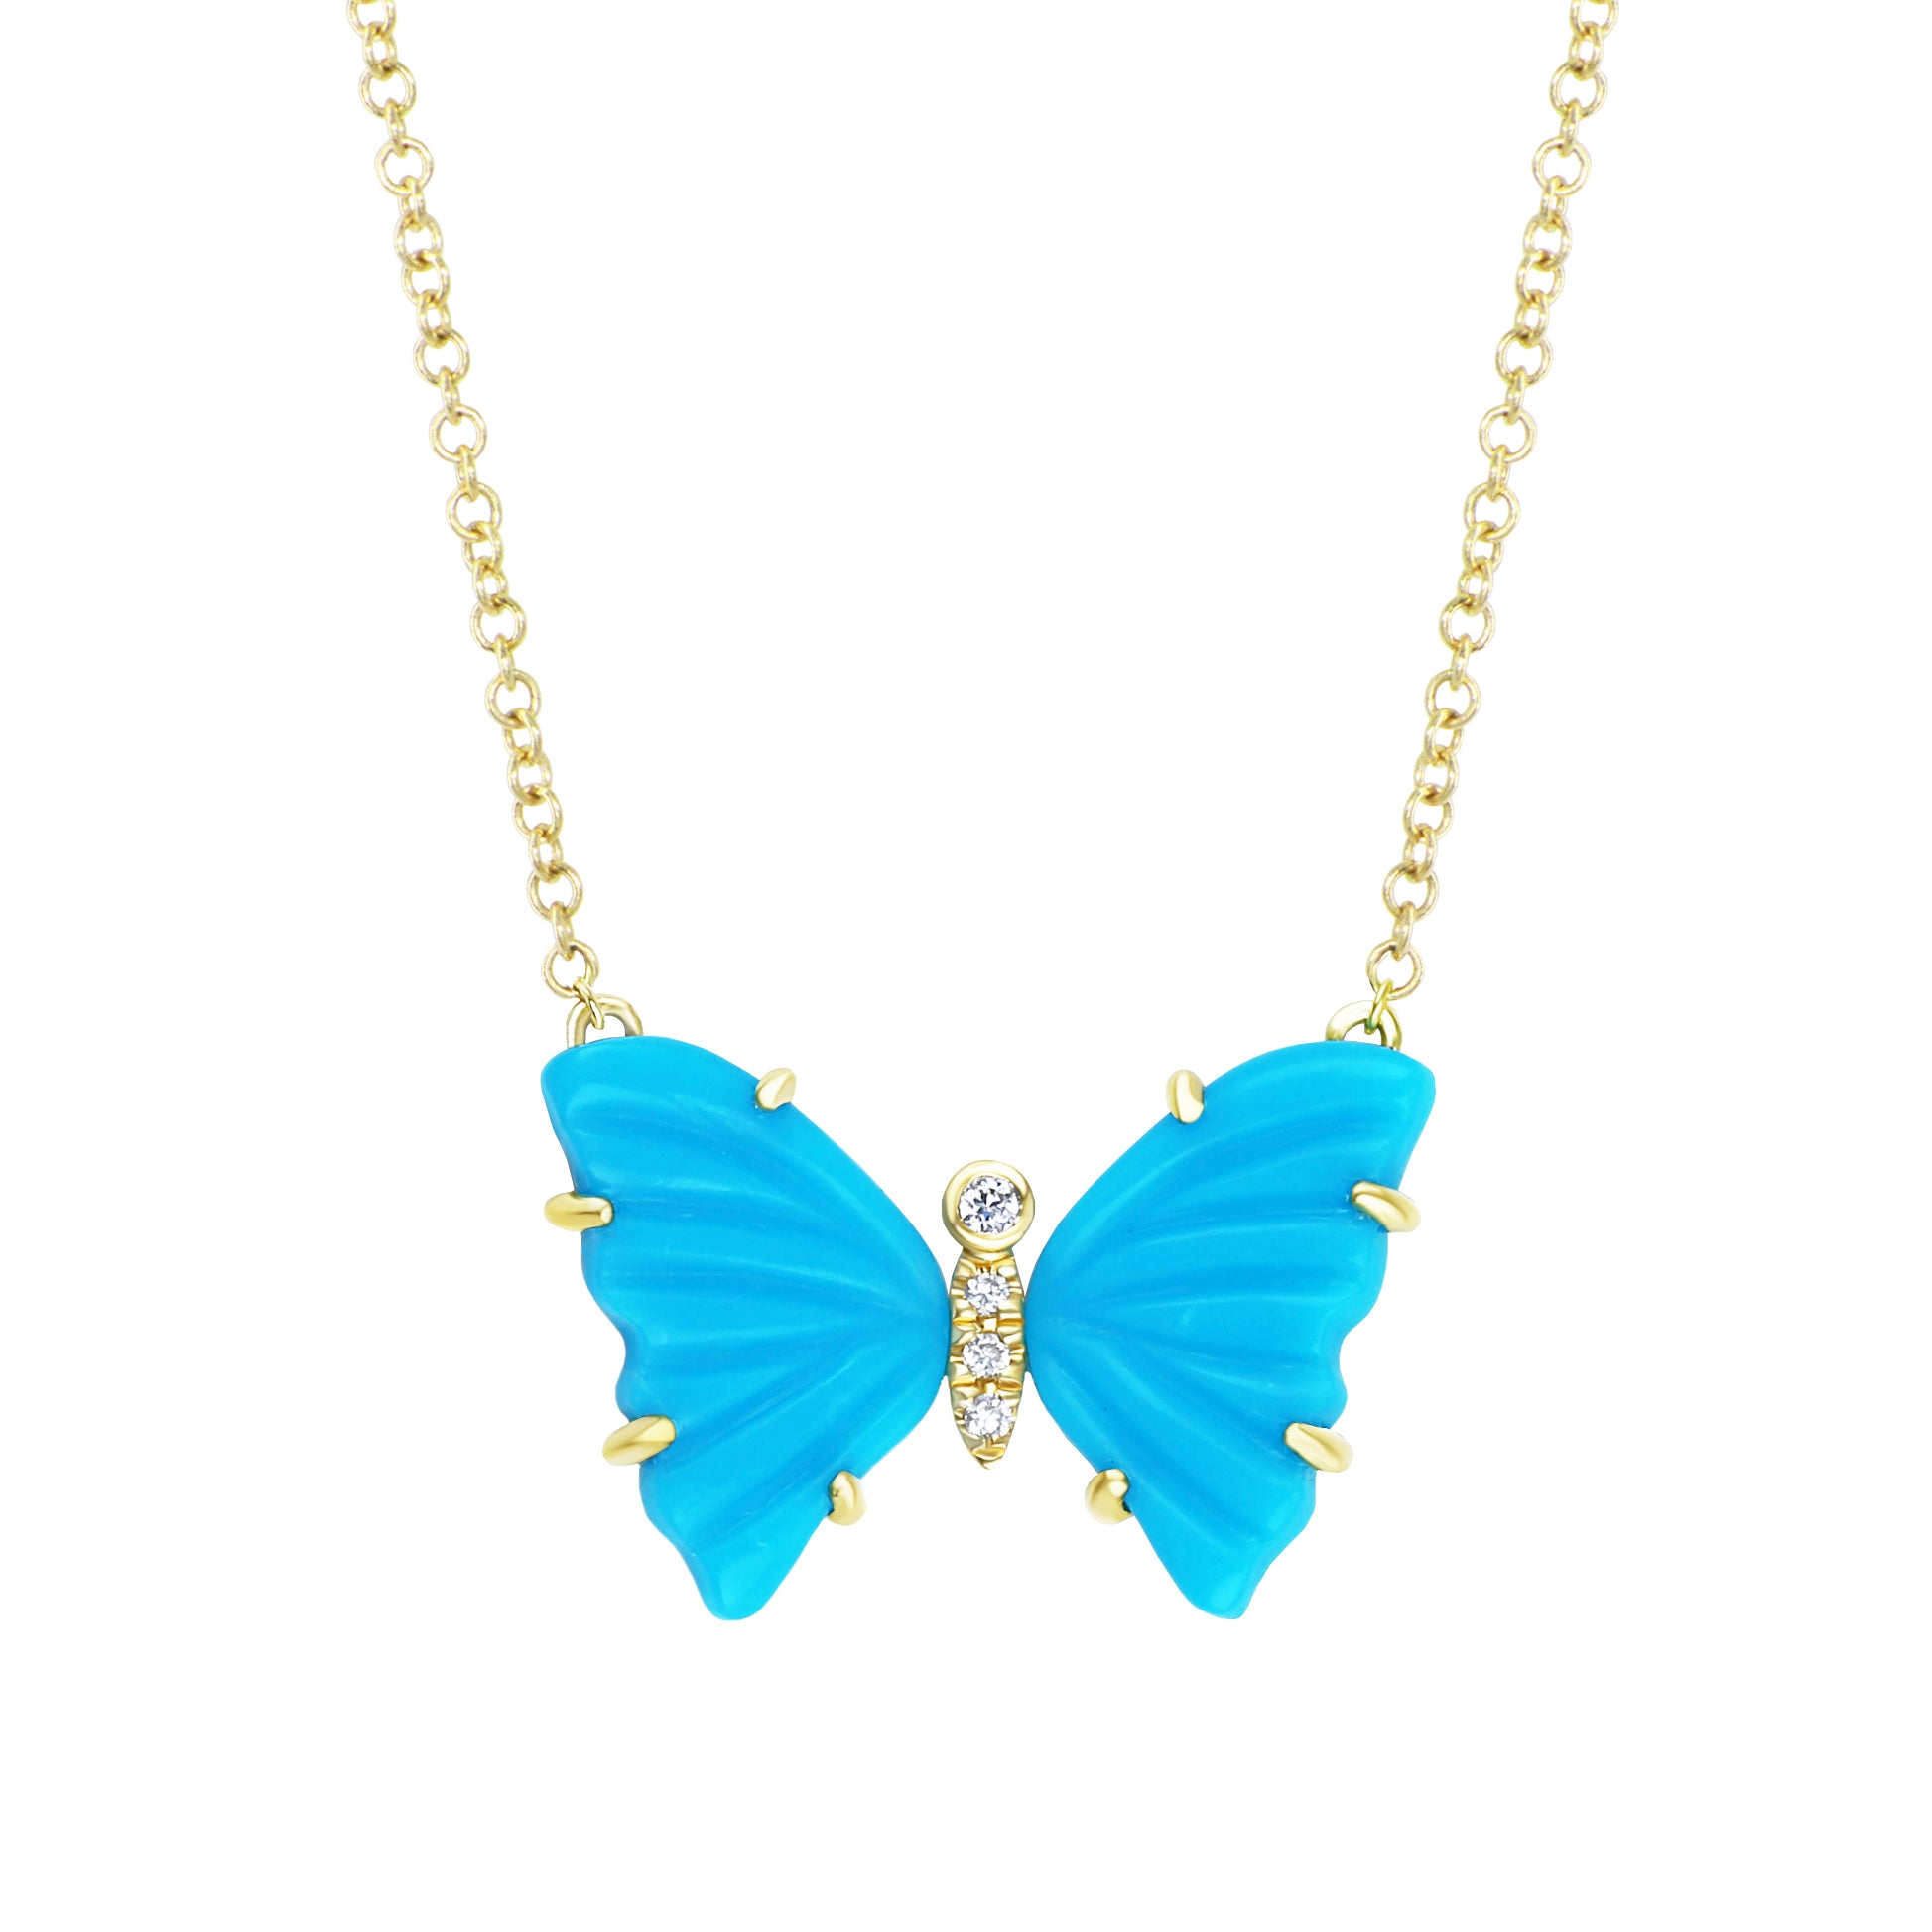 mini pronged butterfly necklace with diamonds in turquoise